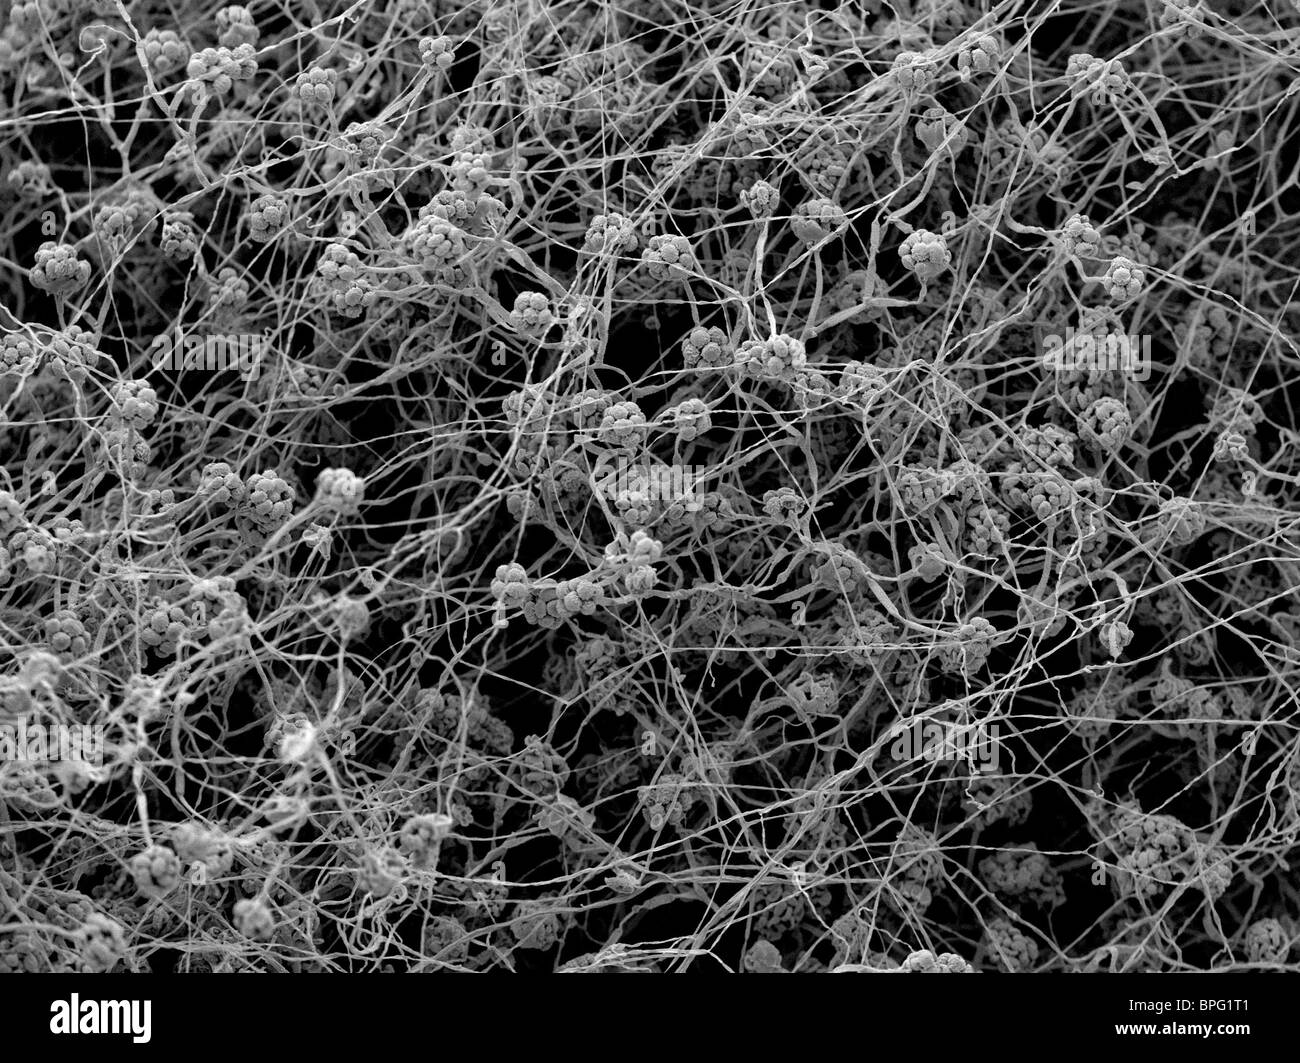 A scanning electron micrograph (SEM) of Stachybotrys chartarum, a greenish black cellulotytic fungus Stock Photo